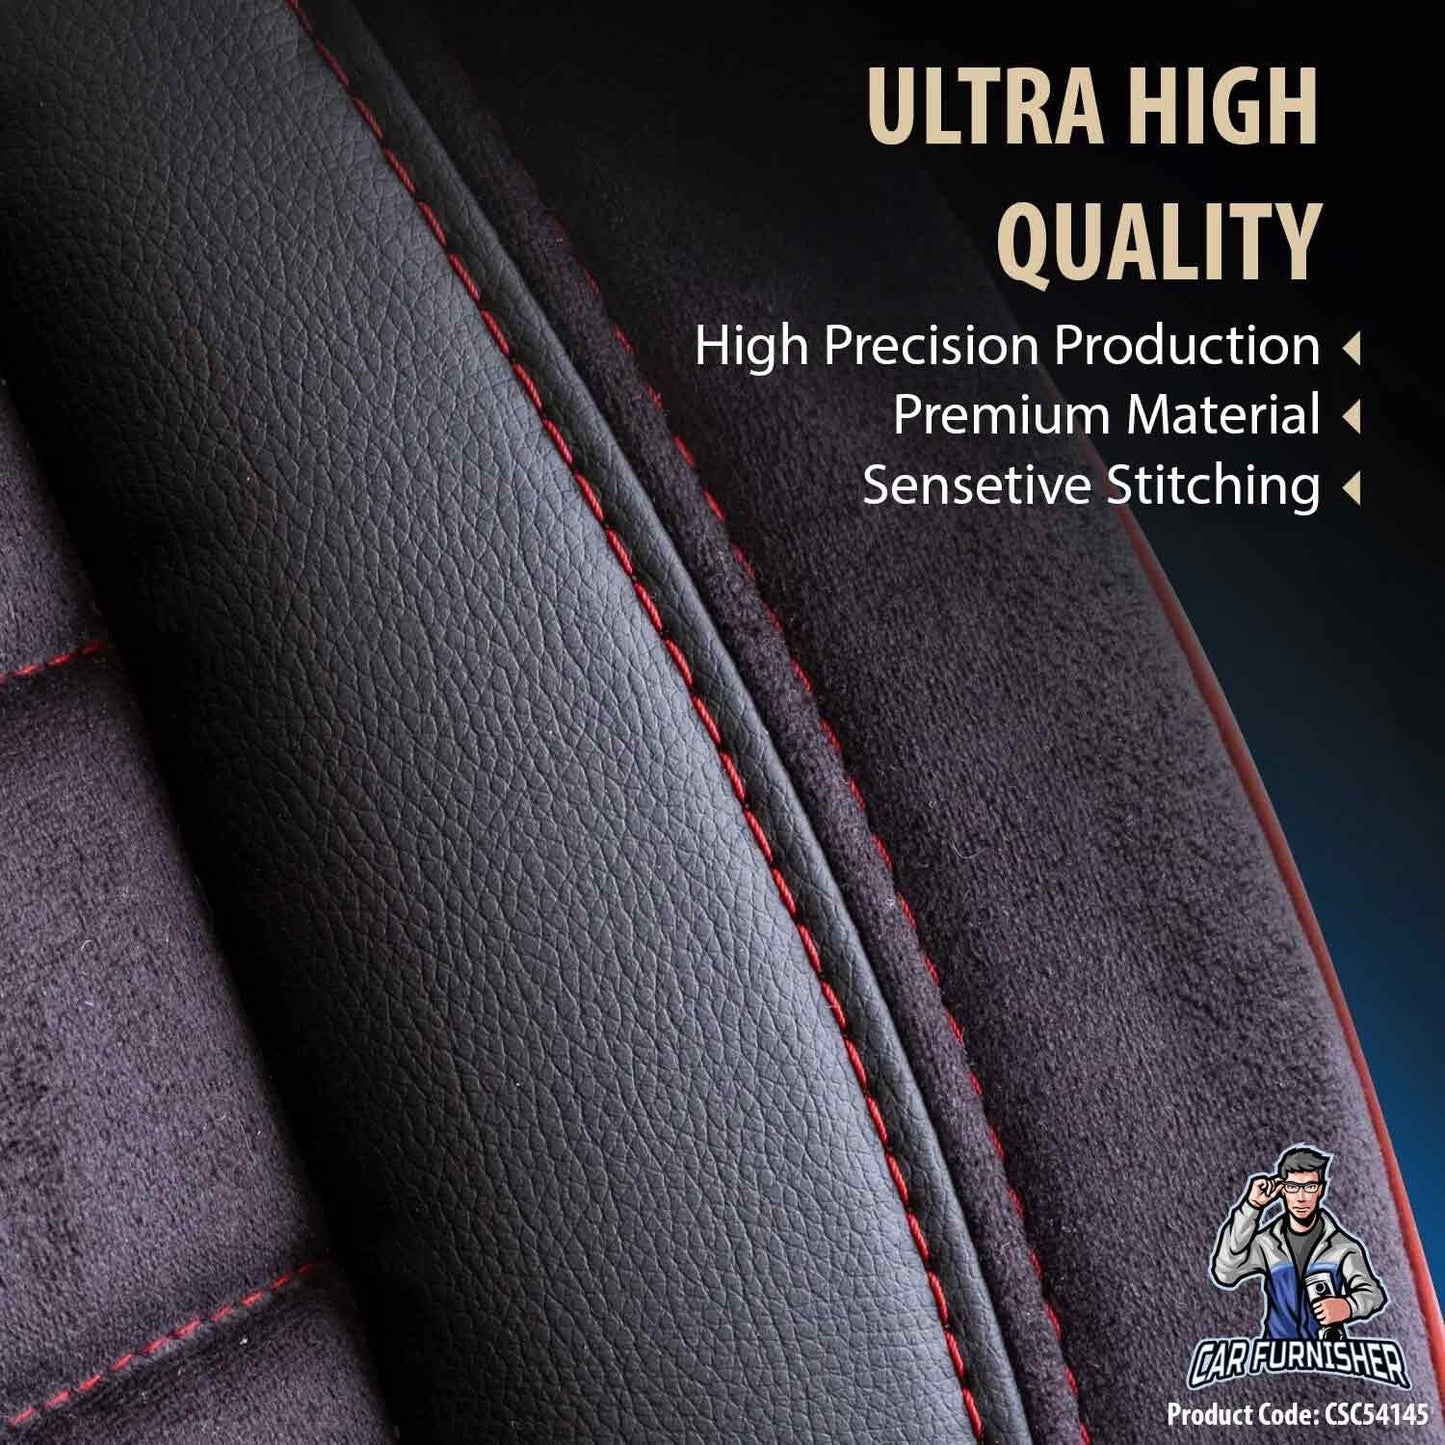 Mercedes 190 Seat Covers Toronto Design Dark Red 5 Seats + Headrests (Full Set) Leather & Suede Fabric